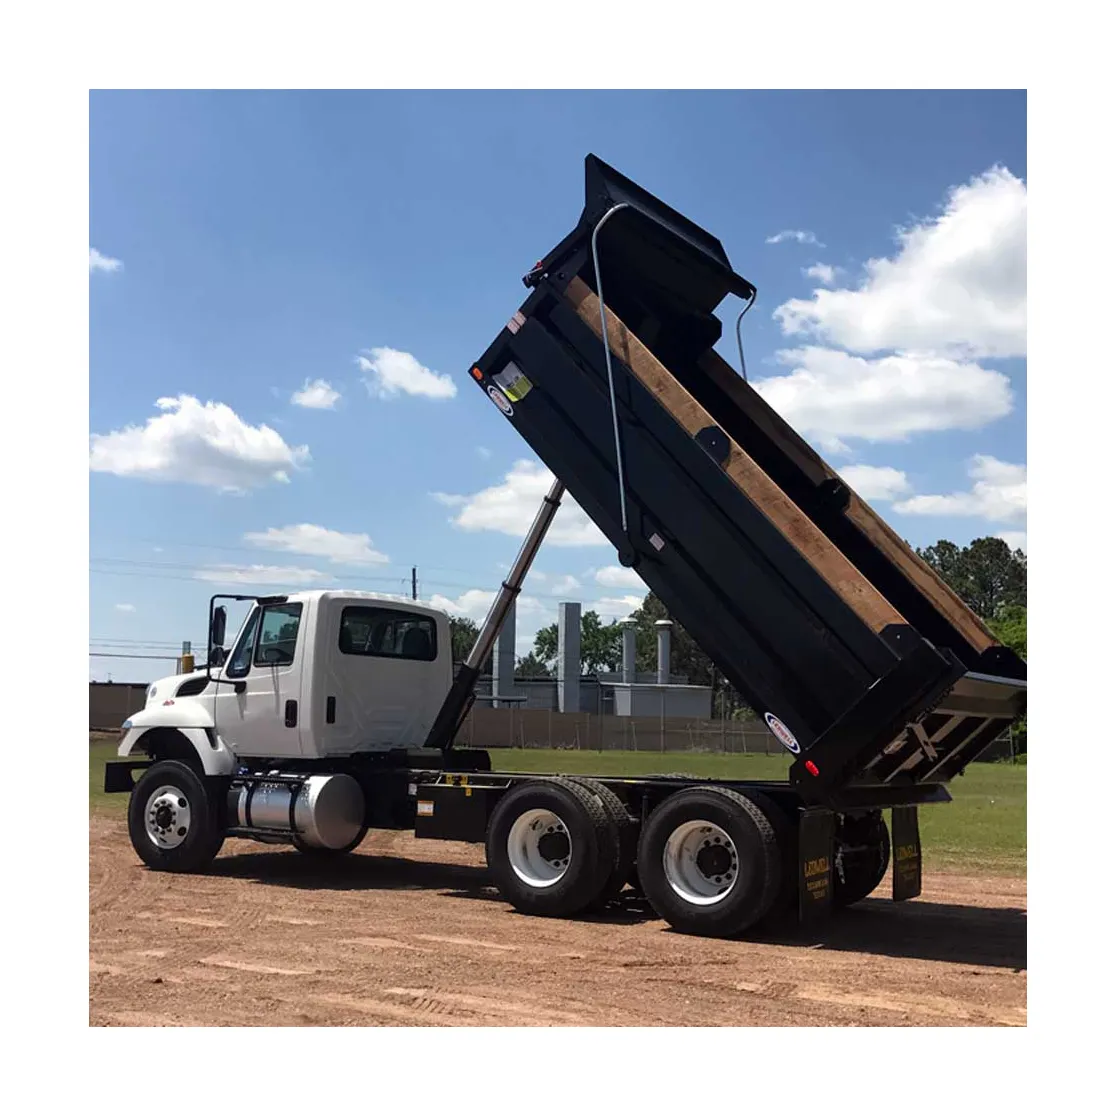 2014 MAN 35.480 TGA8x416 20 Cubic Meter 10 Wheel Tipper Truck Mining Dump Truck for Sale Used and New Diesel Engine Unit Gross